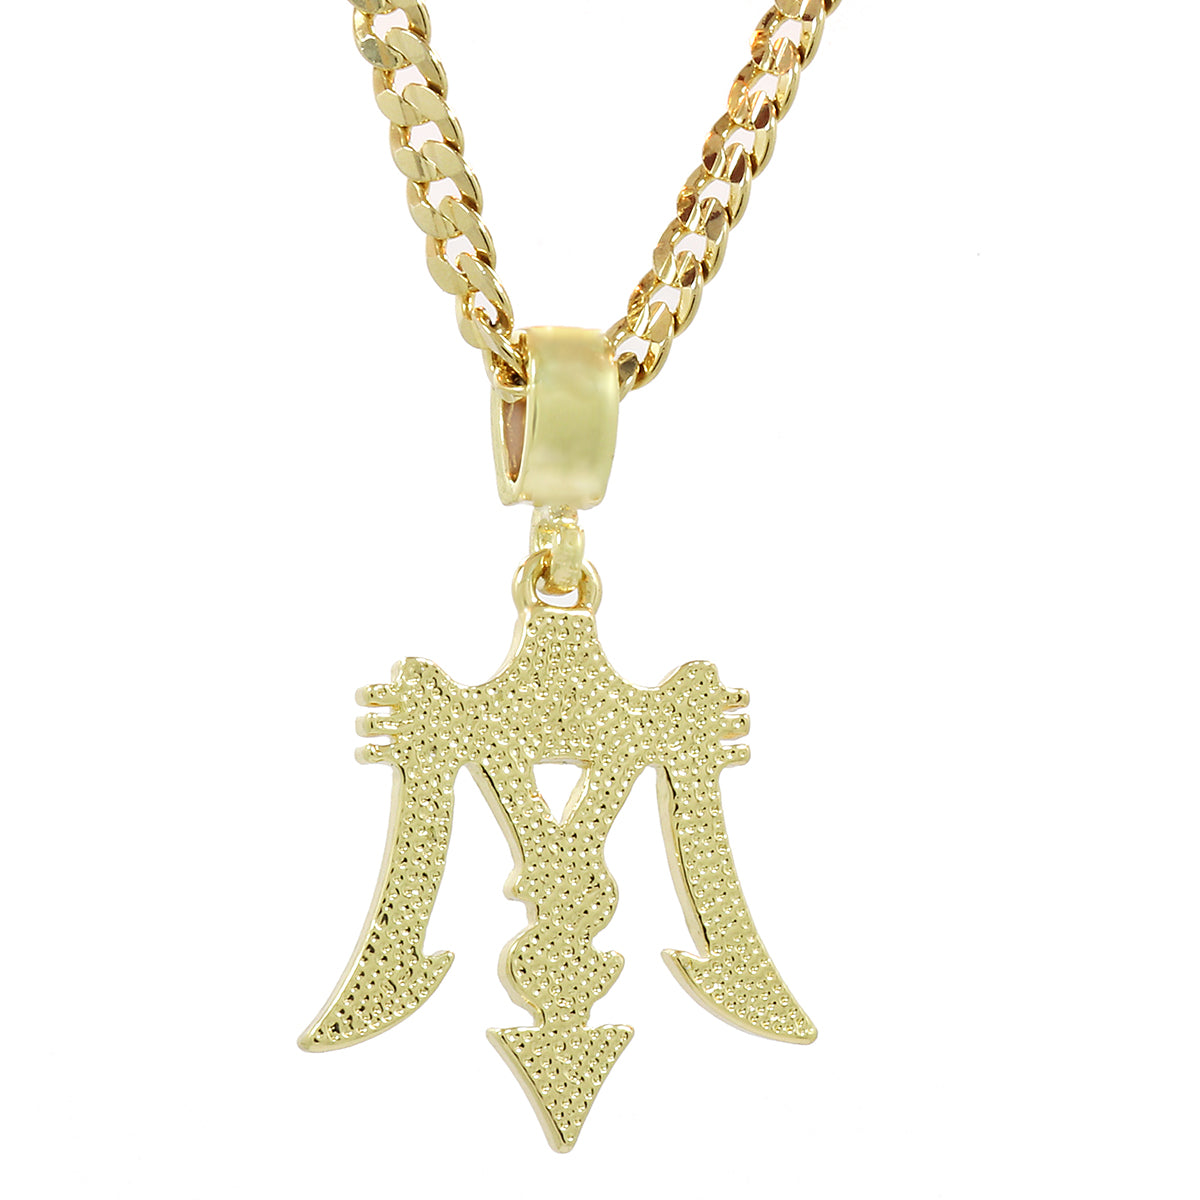 The Money Is Life Necklace